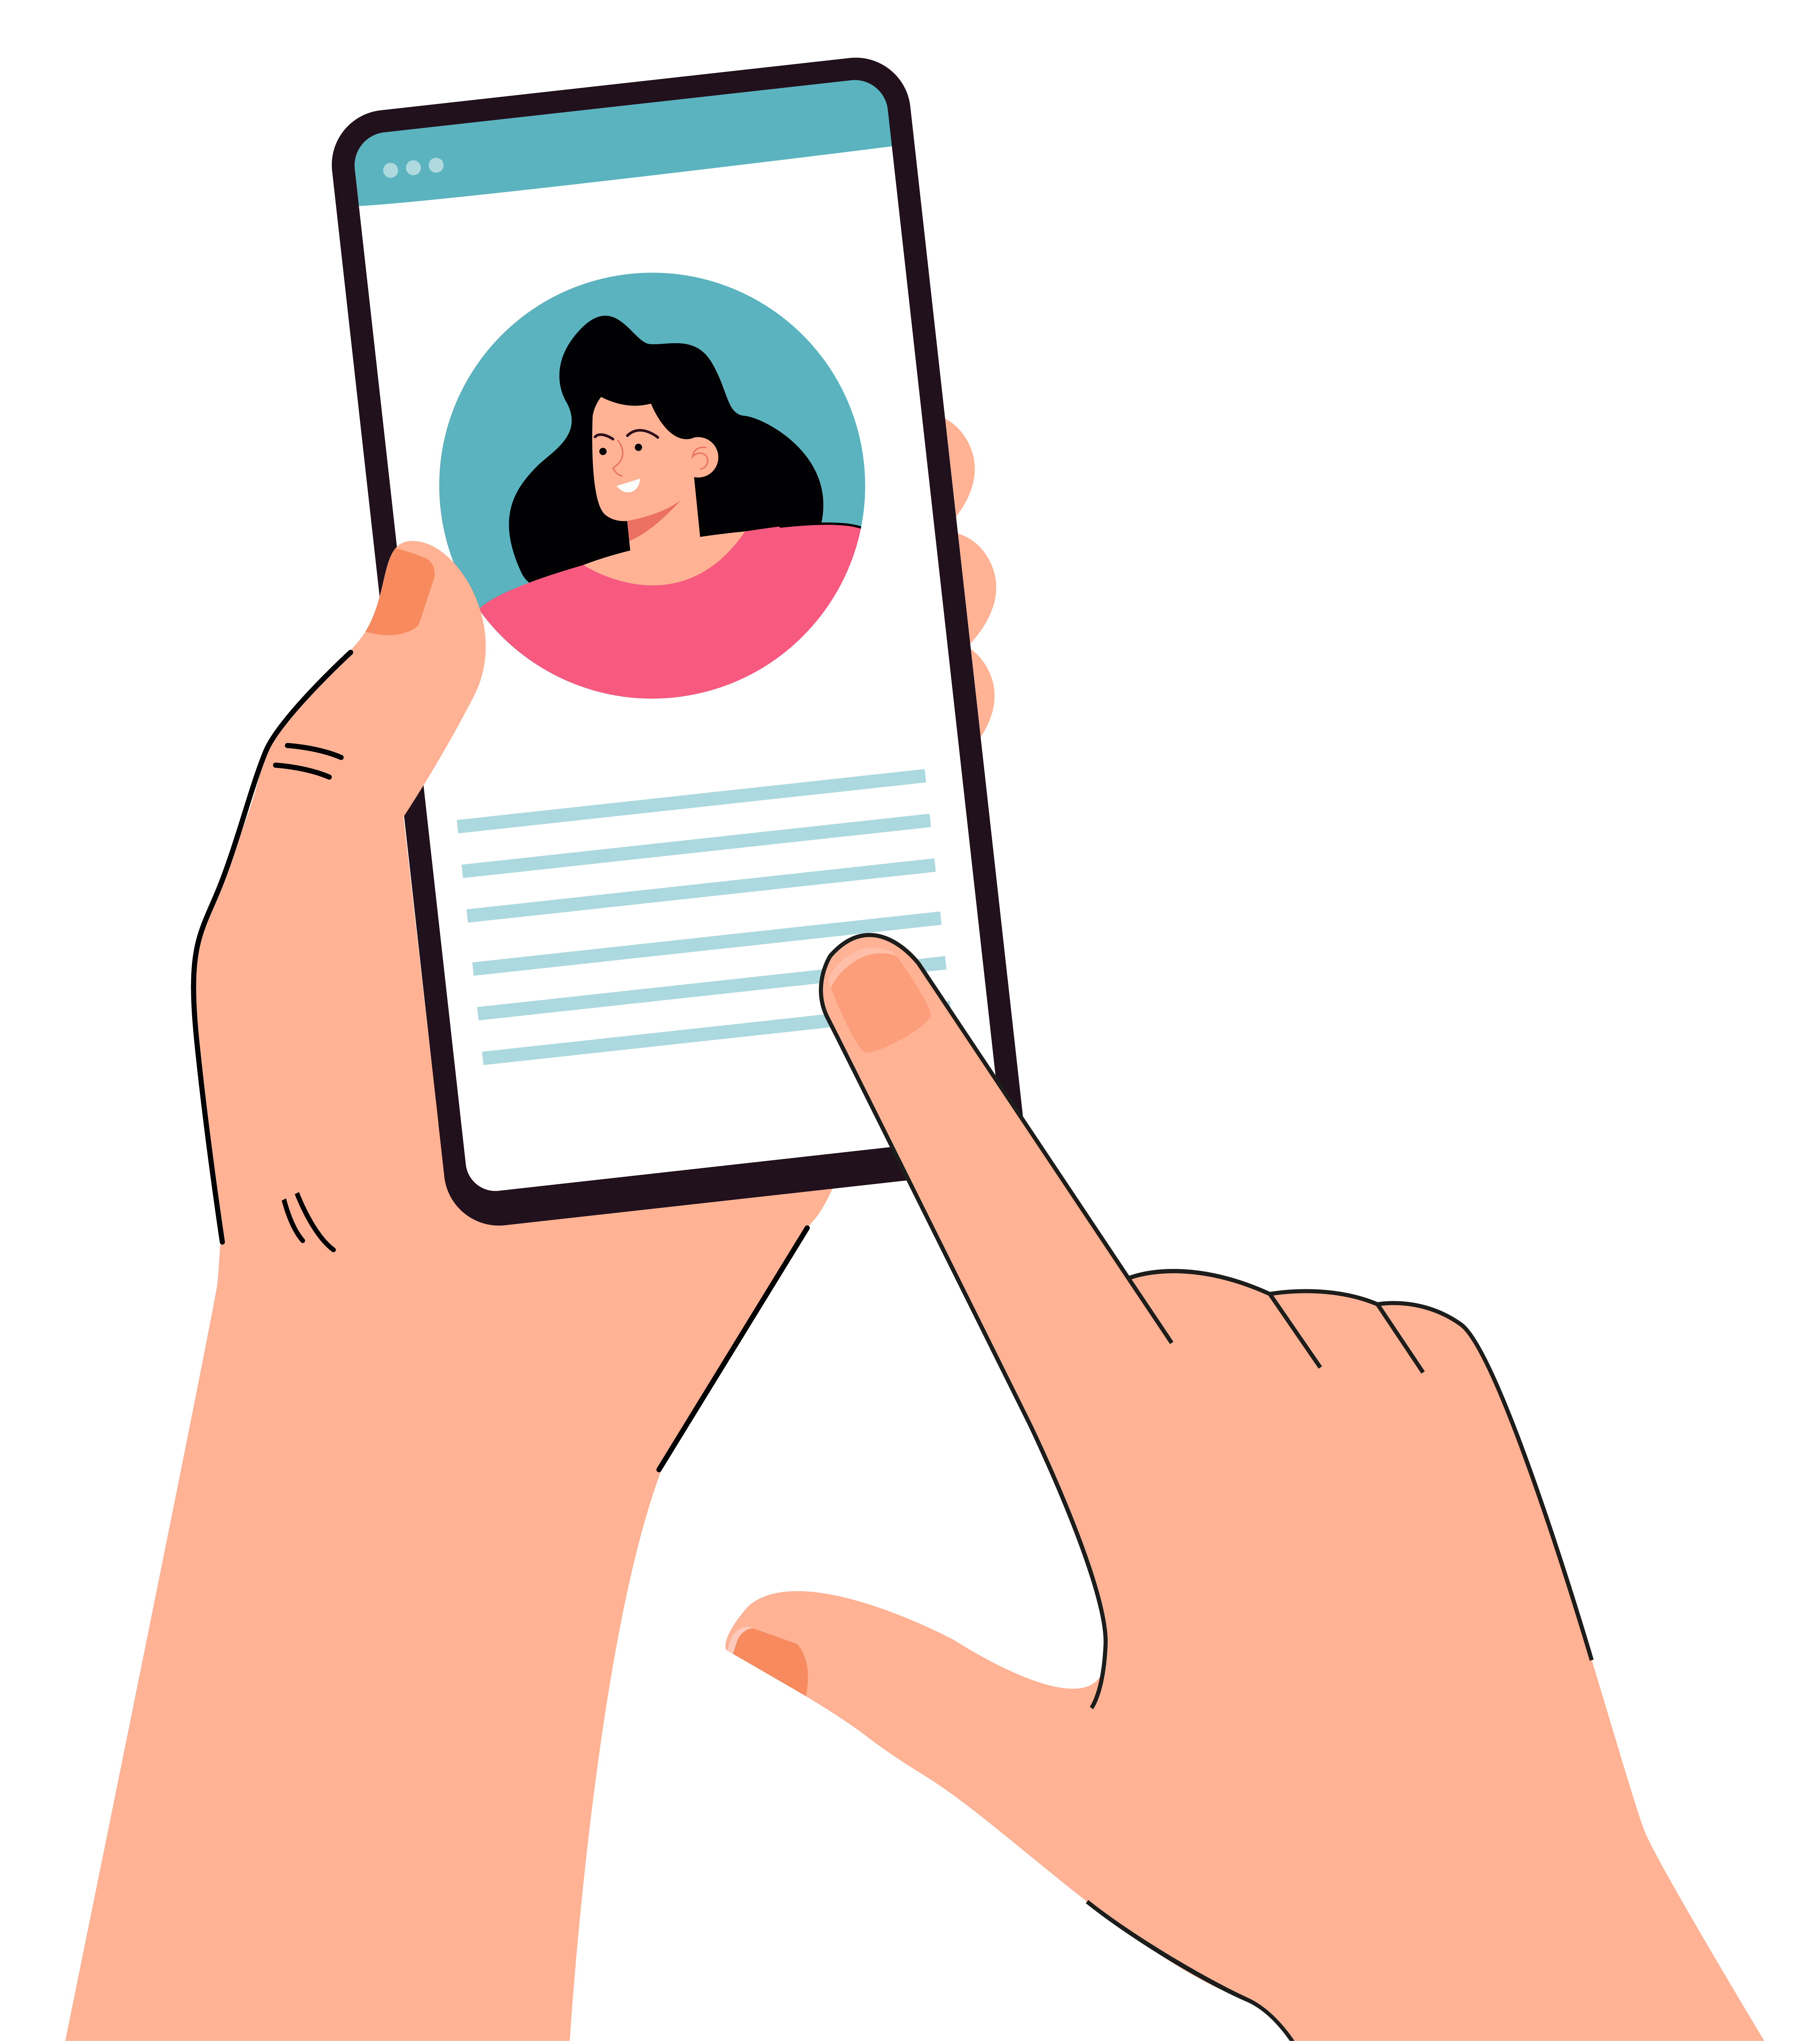 illustration of a hand holding a phone with a social media account